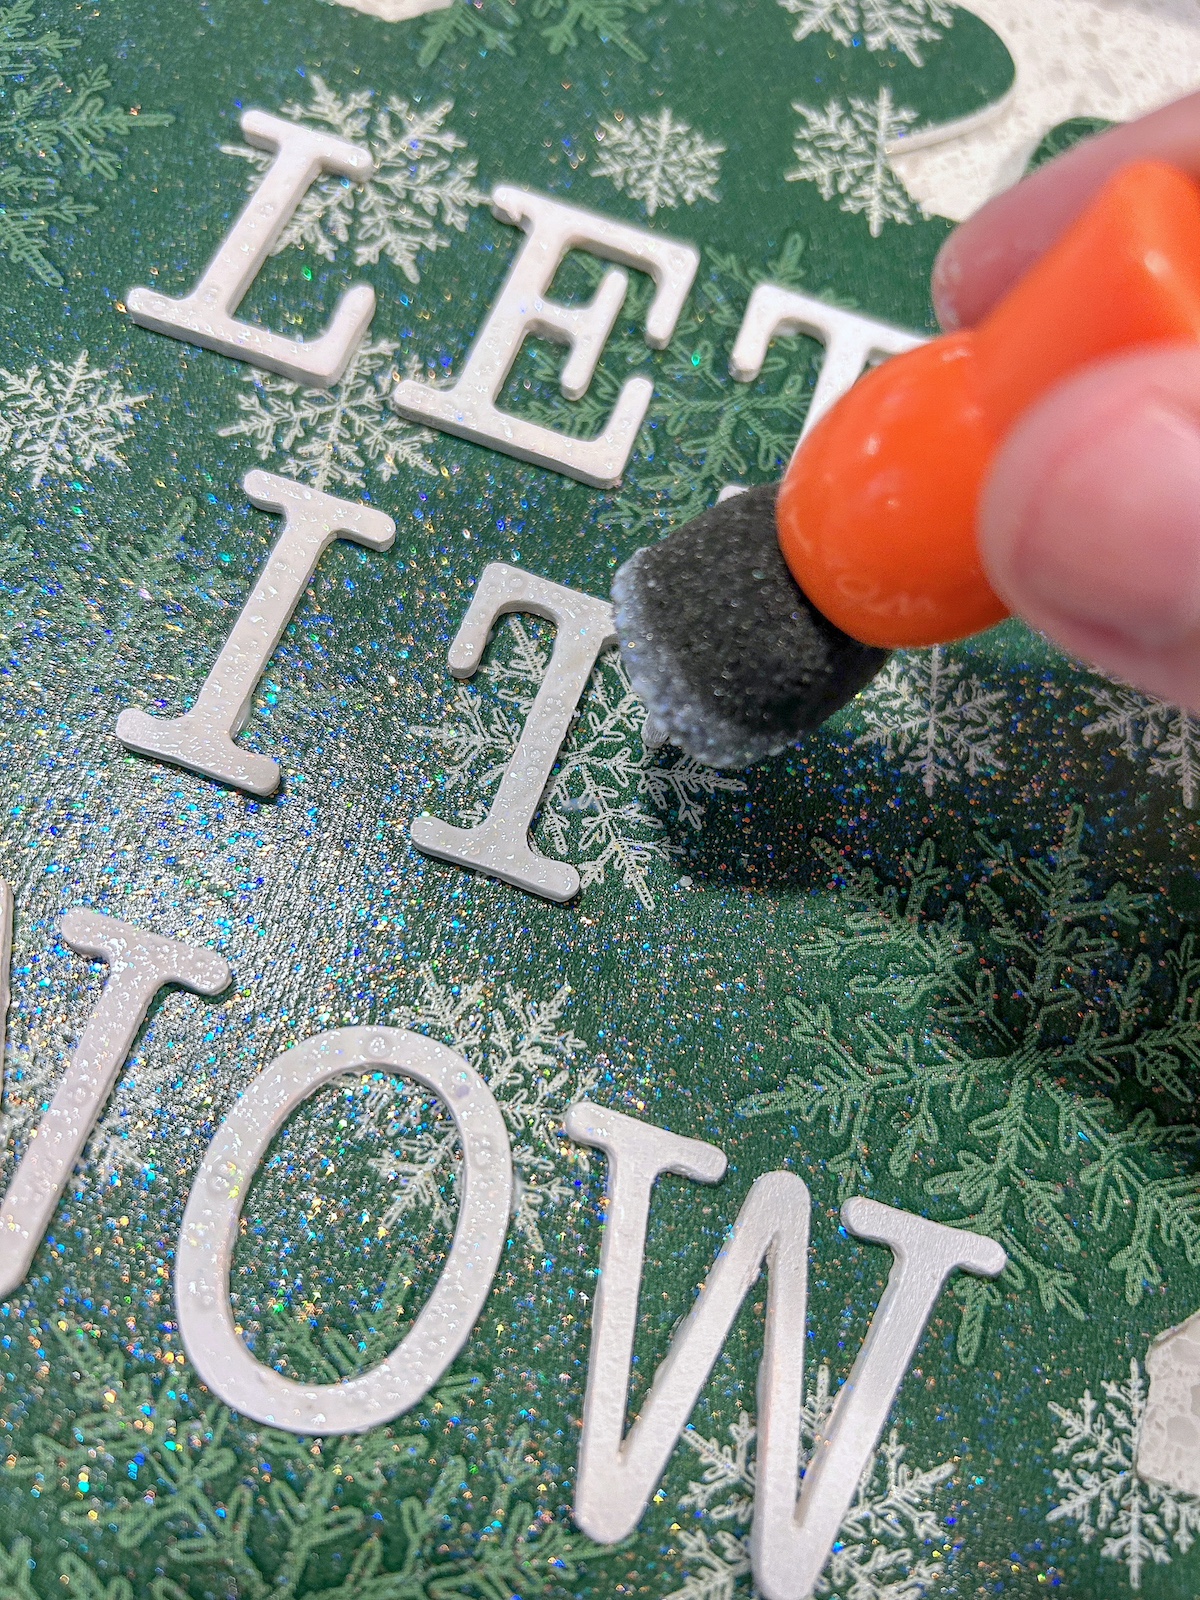 Painting the wood letters with white glitter paint